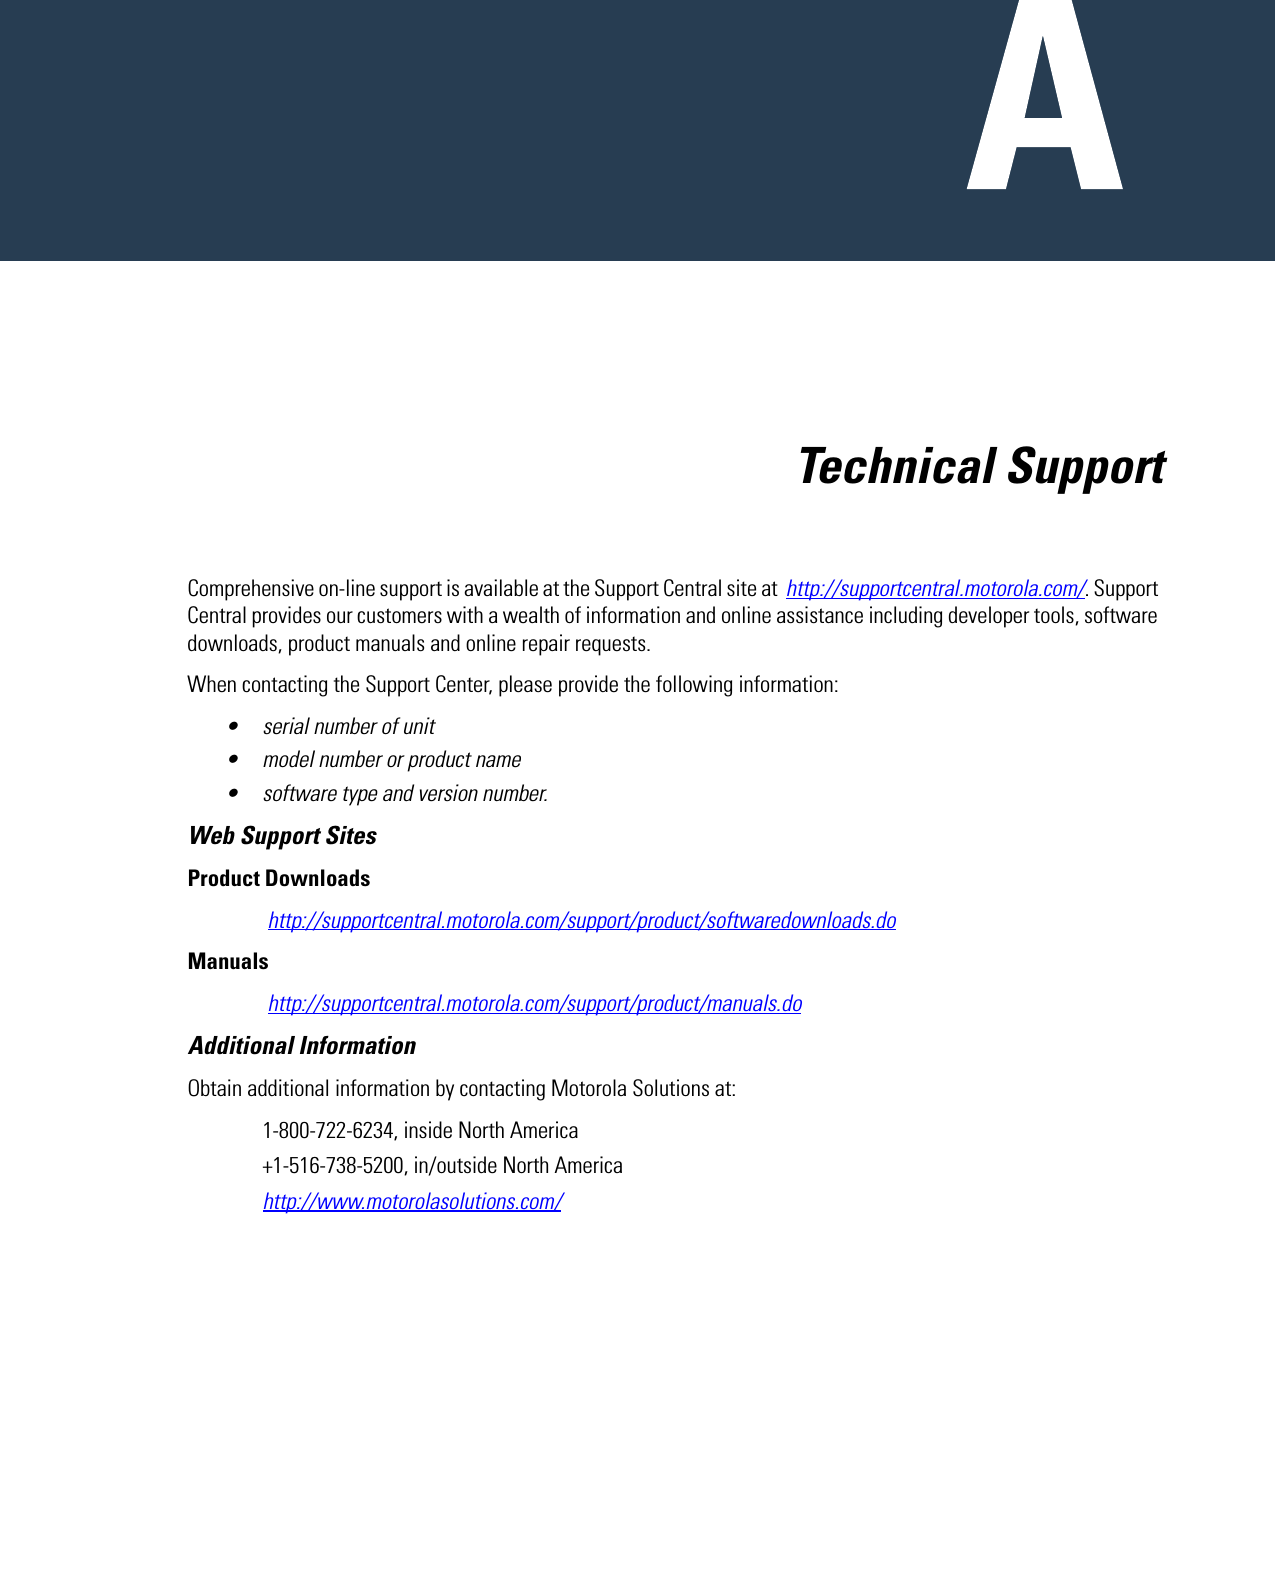   Technical SupportComprehensive on-line support is available at the Support Central site at  http://supportcentral.motorola.com/. Support Central provides our customers with a wealth of information and online assistance including developer tools, software downloads, product manuals and online repair requests.When contacting the Support Center, please provide the following information:• serial number of unit• model number or product name• software type and version number.Web Support SitesProduct Downloads http://supportcentral.motorola.com/support/product/softwaredownloads.doManuals http://supportcentral.motorola.com/support/product/manuals.doAdditional InformationObtain additional information by contacting Motorola Solutions at:1-800-722-6234, inside North America+1-516-738-5200, in/outside North Americahttp://www.motorolasolutions.com/